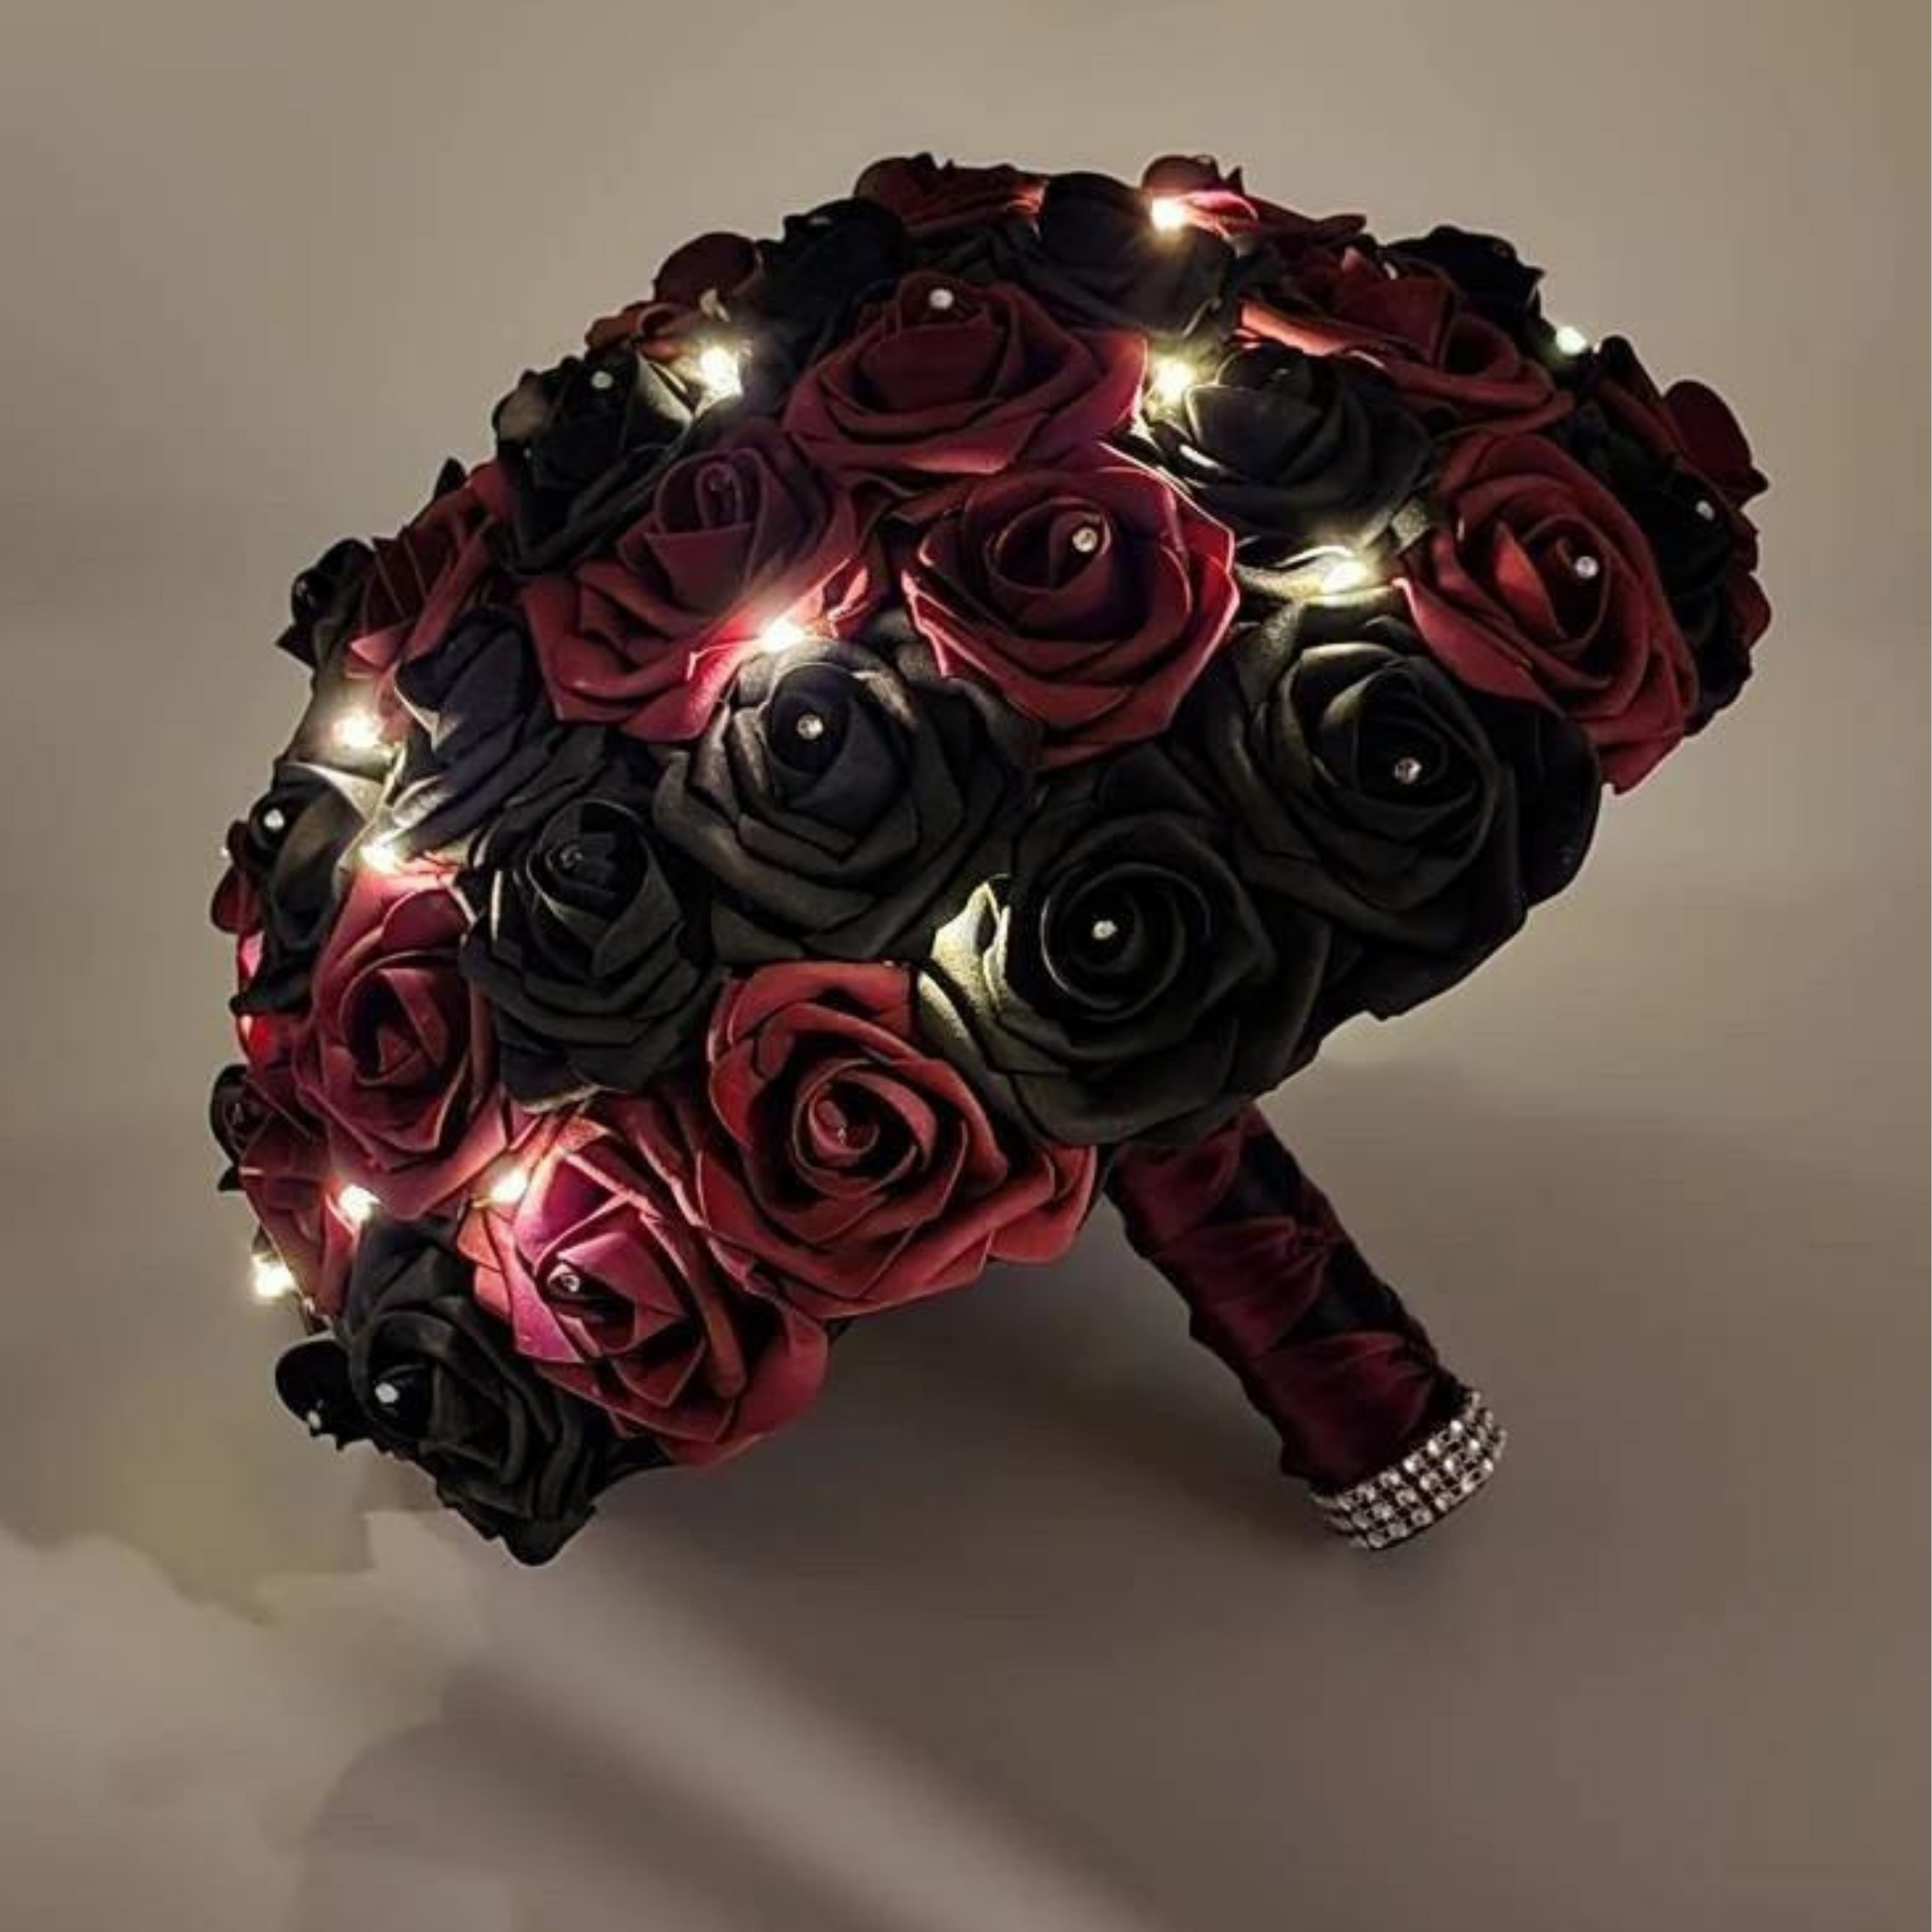 burgundy and black bridal bouquet with fairy lights with a black and burgundy french twist ribbon